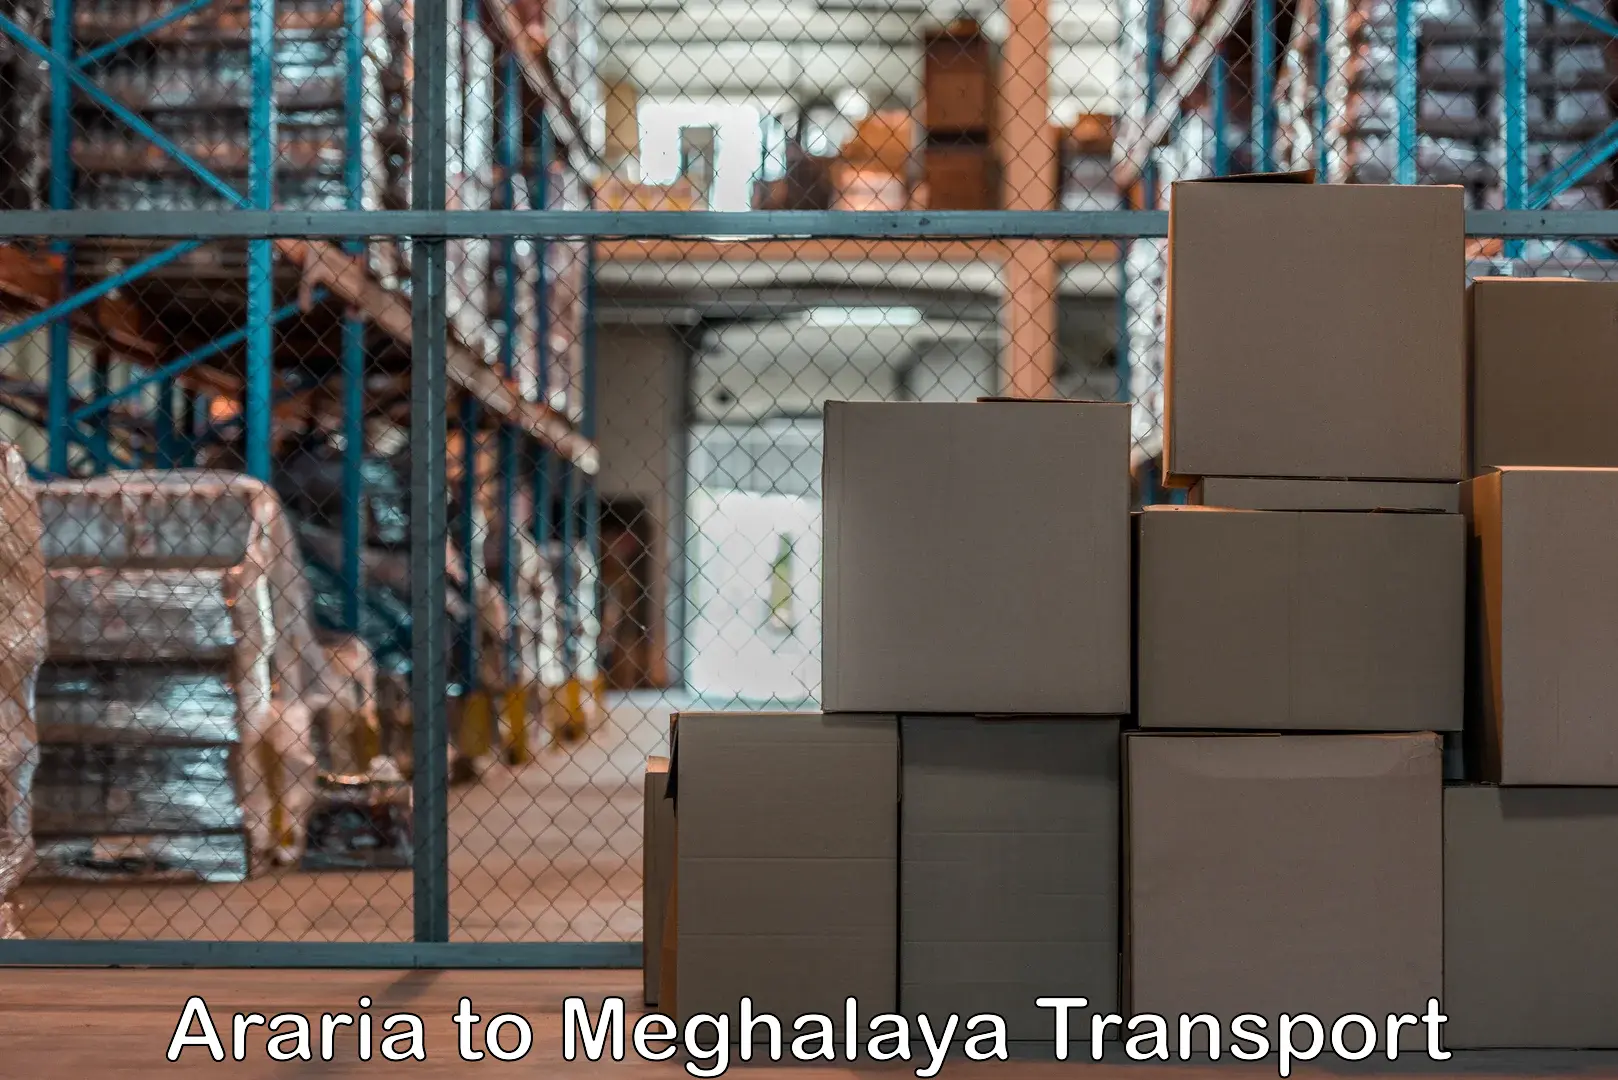 Truck transport companies in India Araria to Dkhiah West